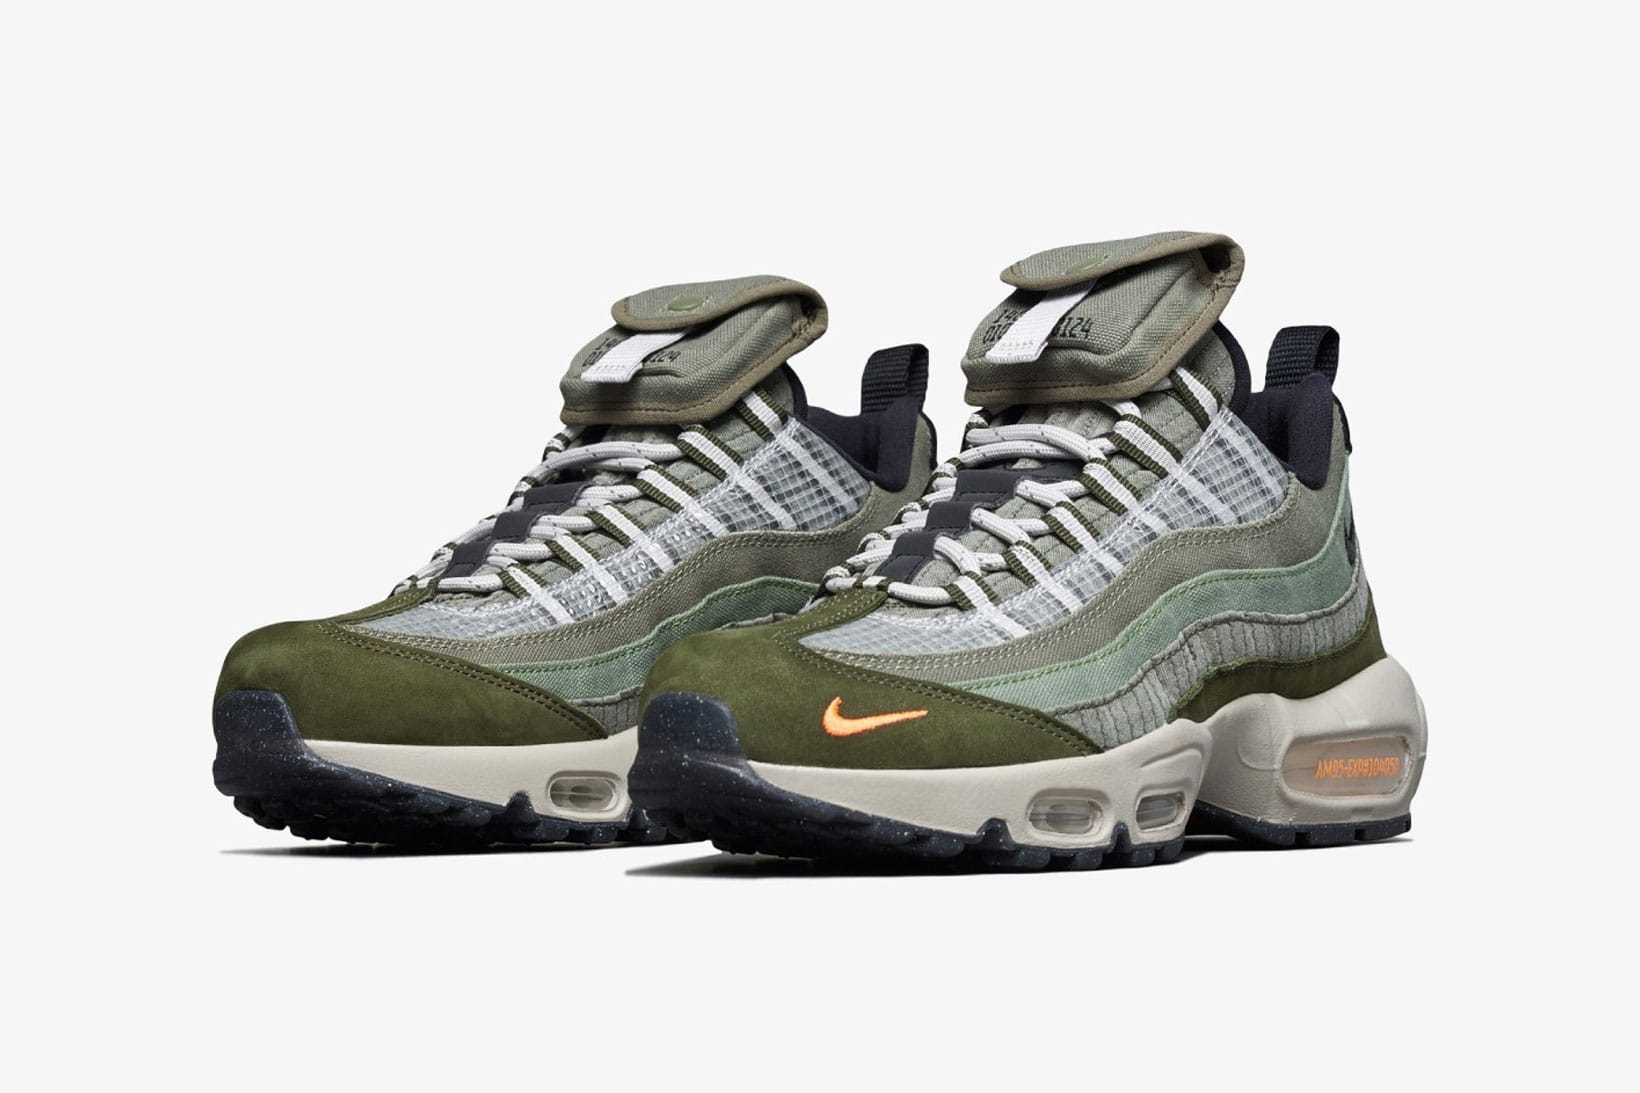 when did air max 95 come out